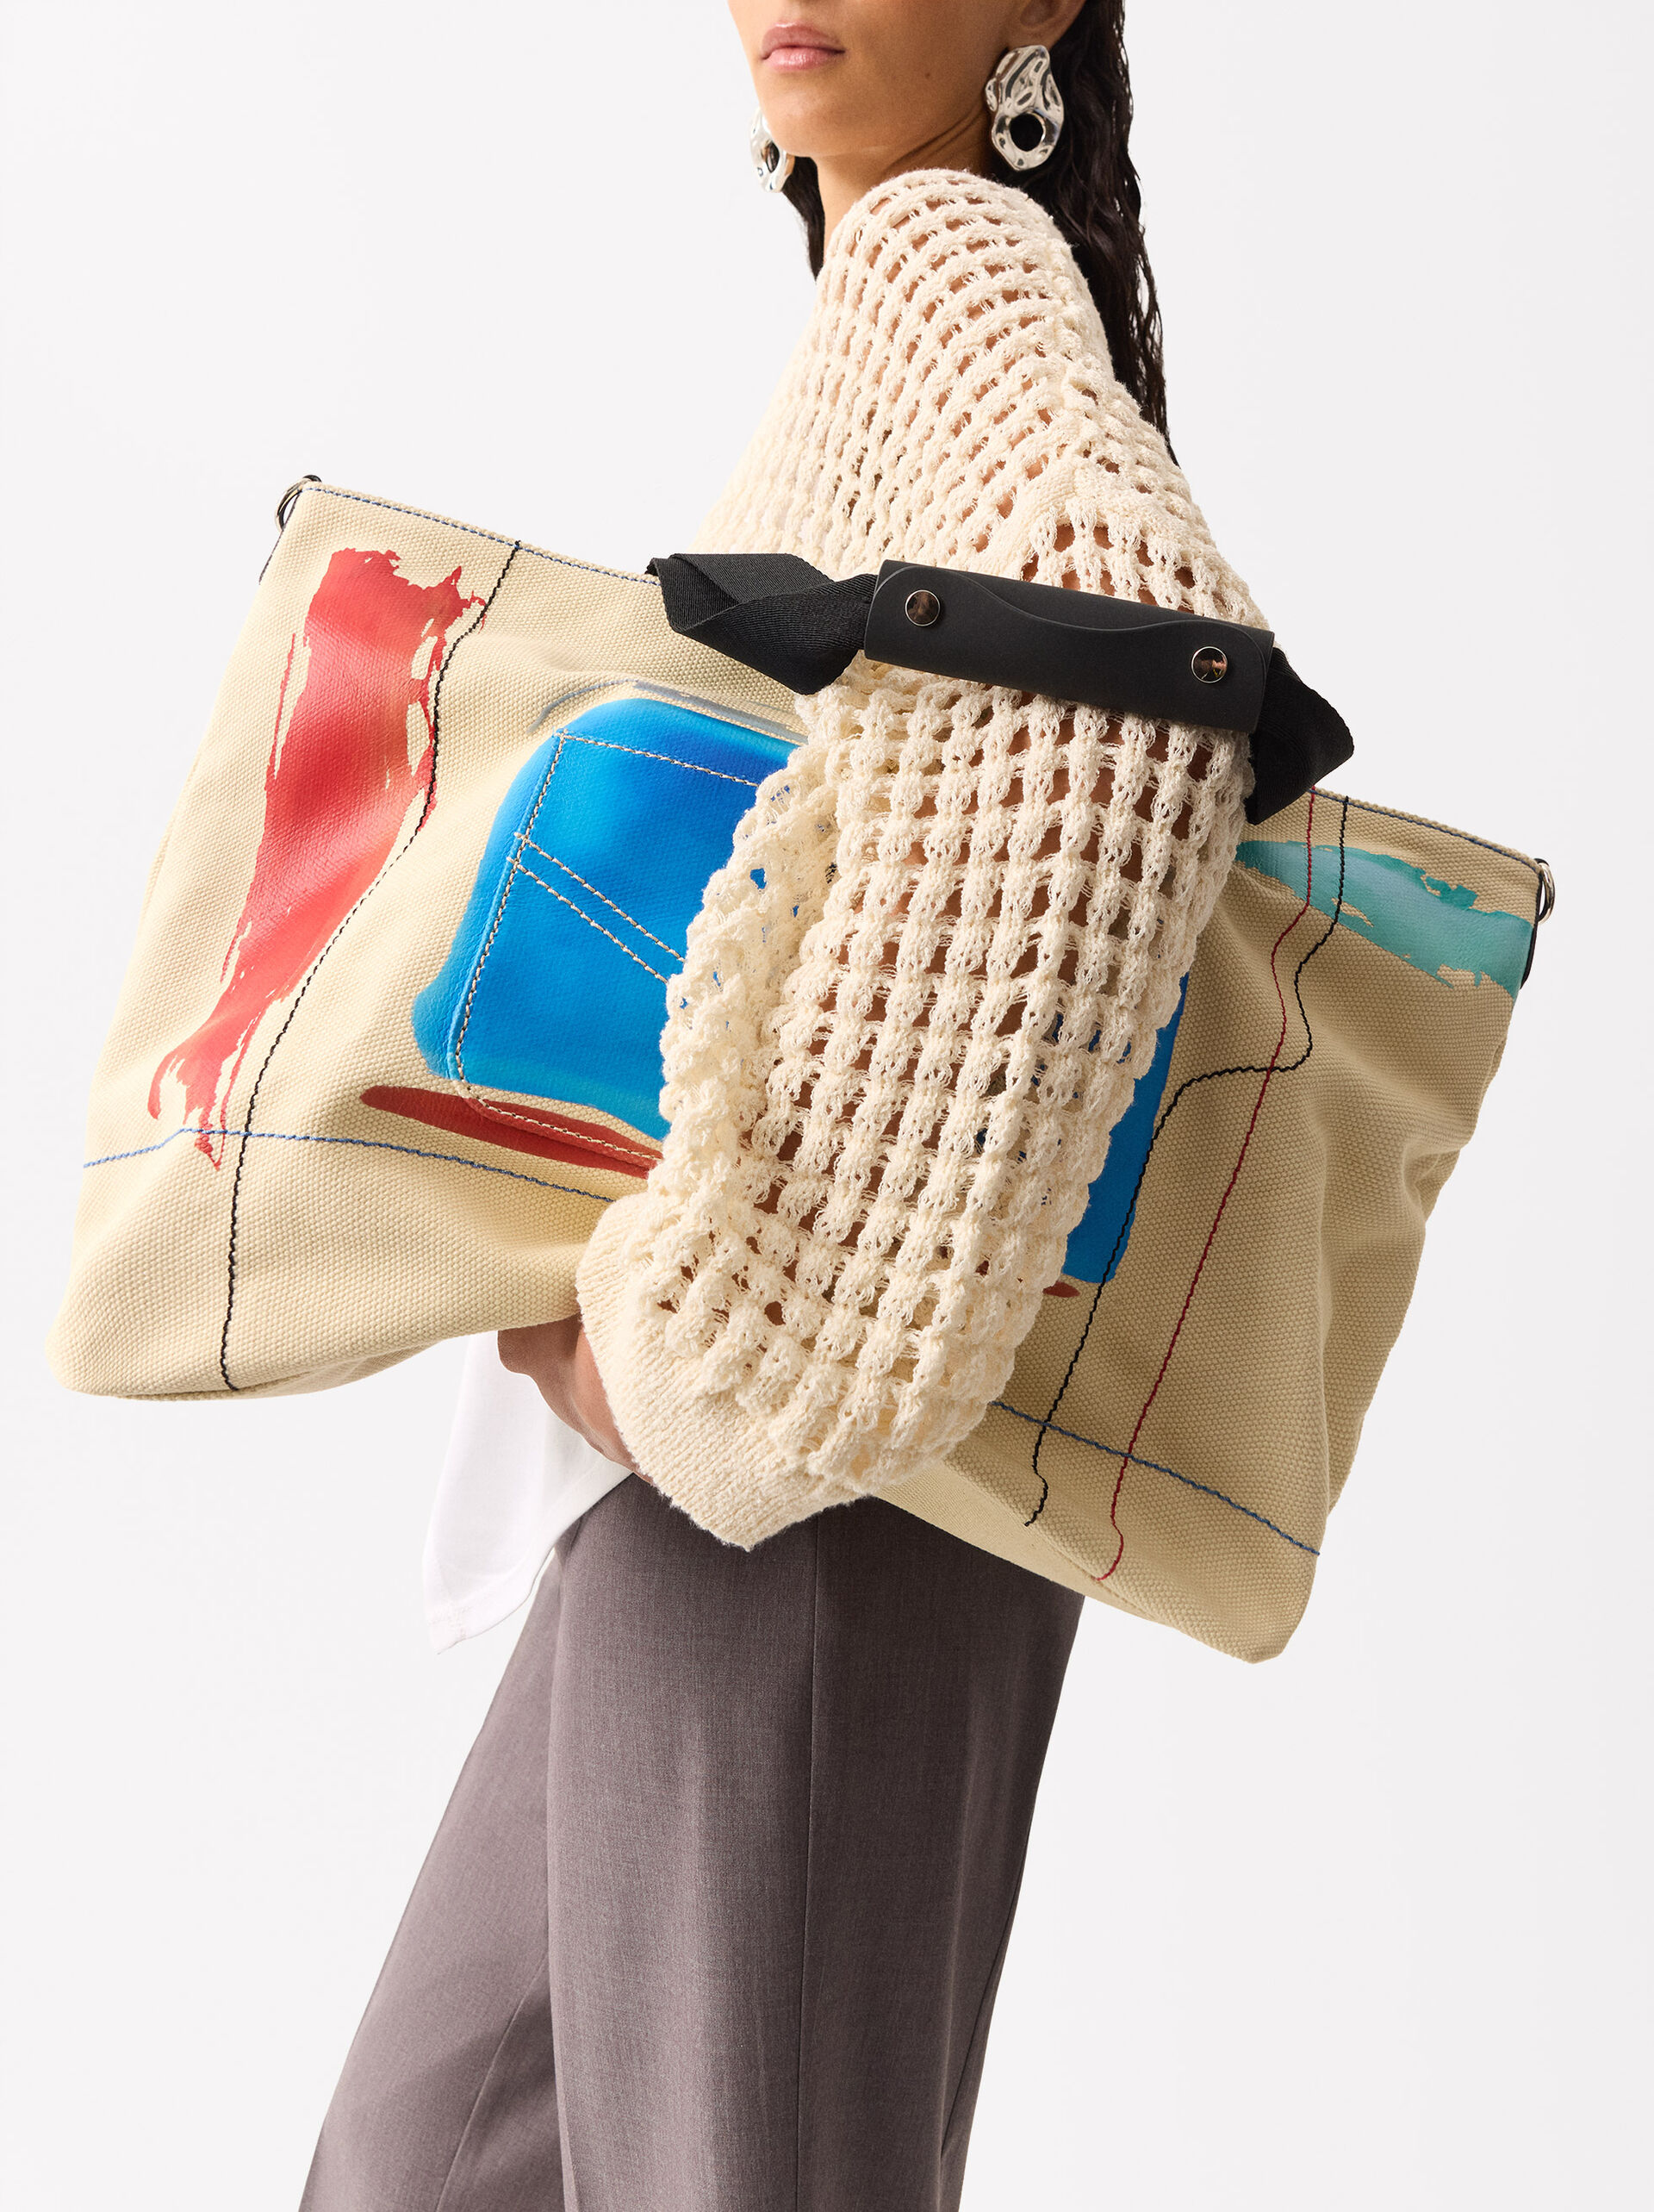 Online Exclusive - Borsa Shopper Con Stampa image number 1.0